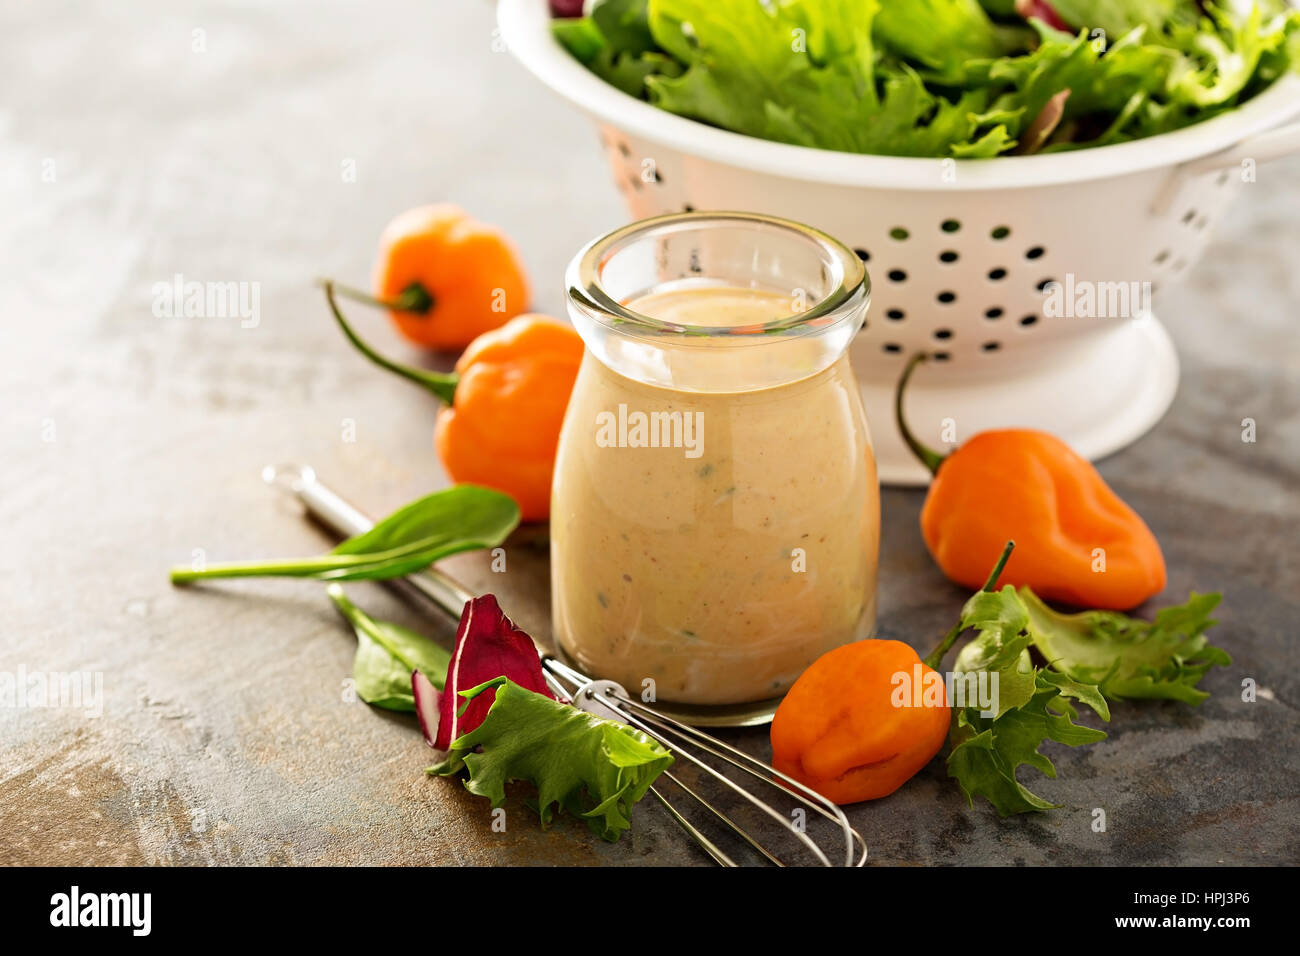 Sriracha ranch salad dressing with hot peppers Stock Photo